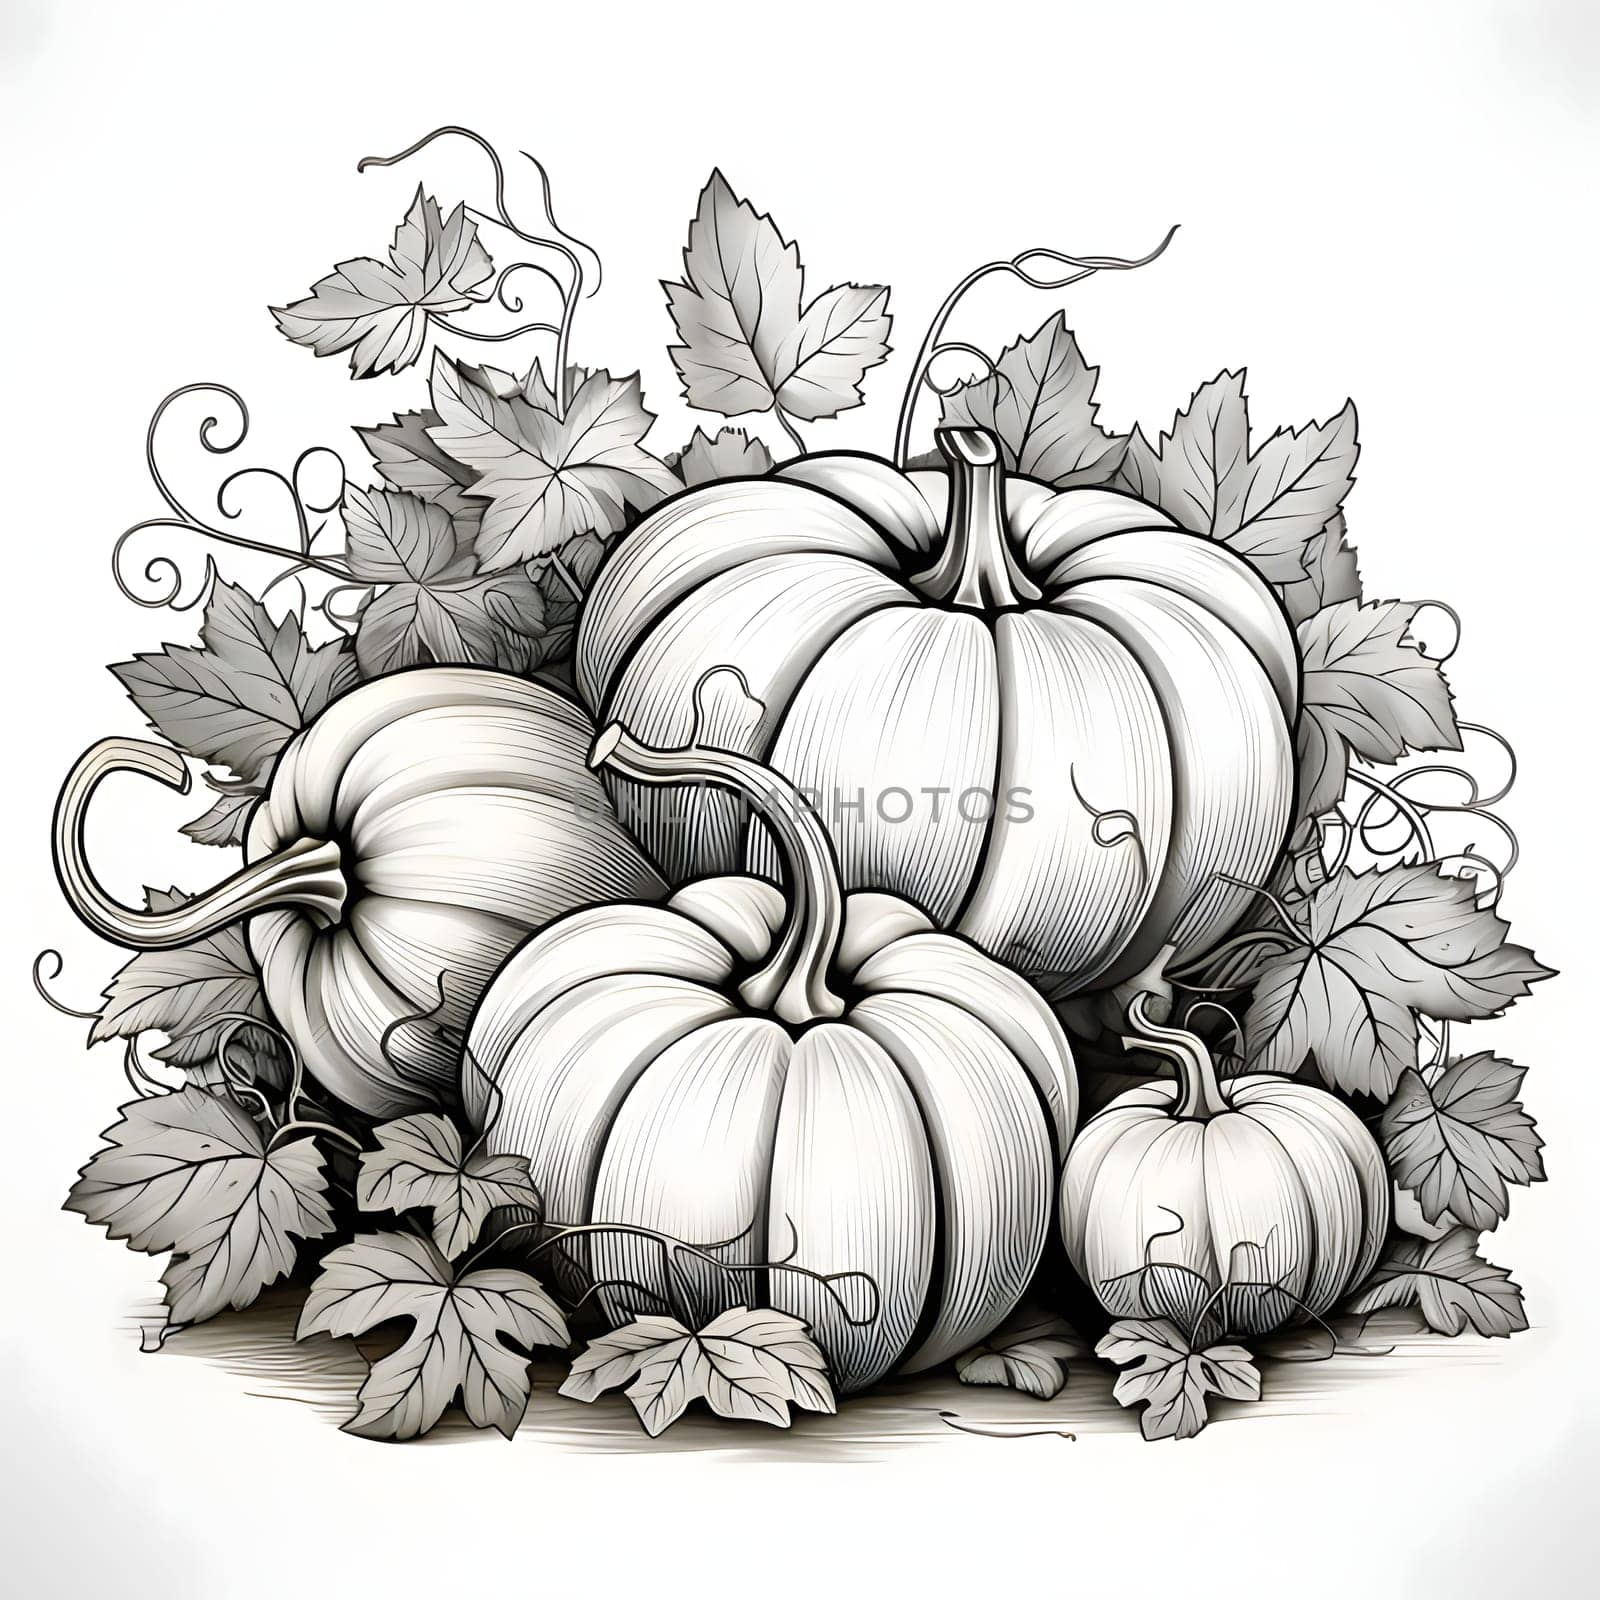 Black and white pumpkins with leaves. Pumpkin as a dish of thanksgiving for the harvest. An atmosphere of joy and celebration.